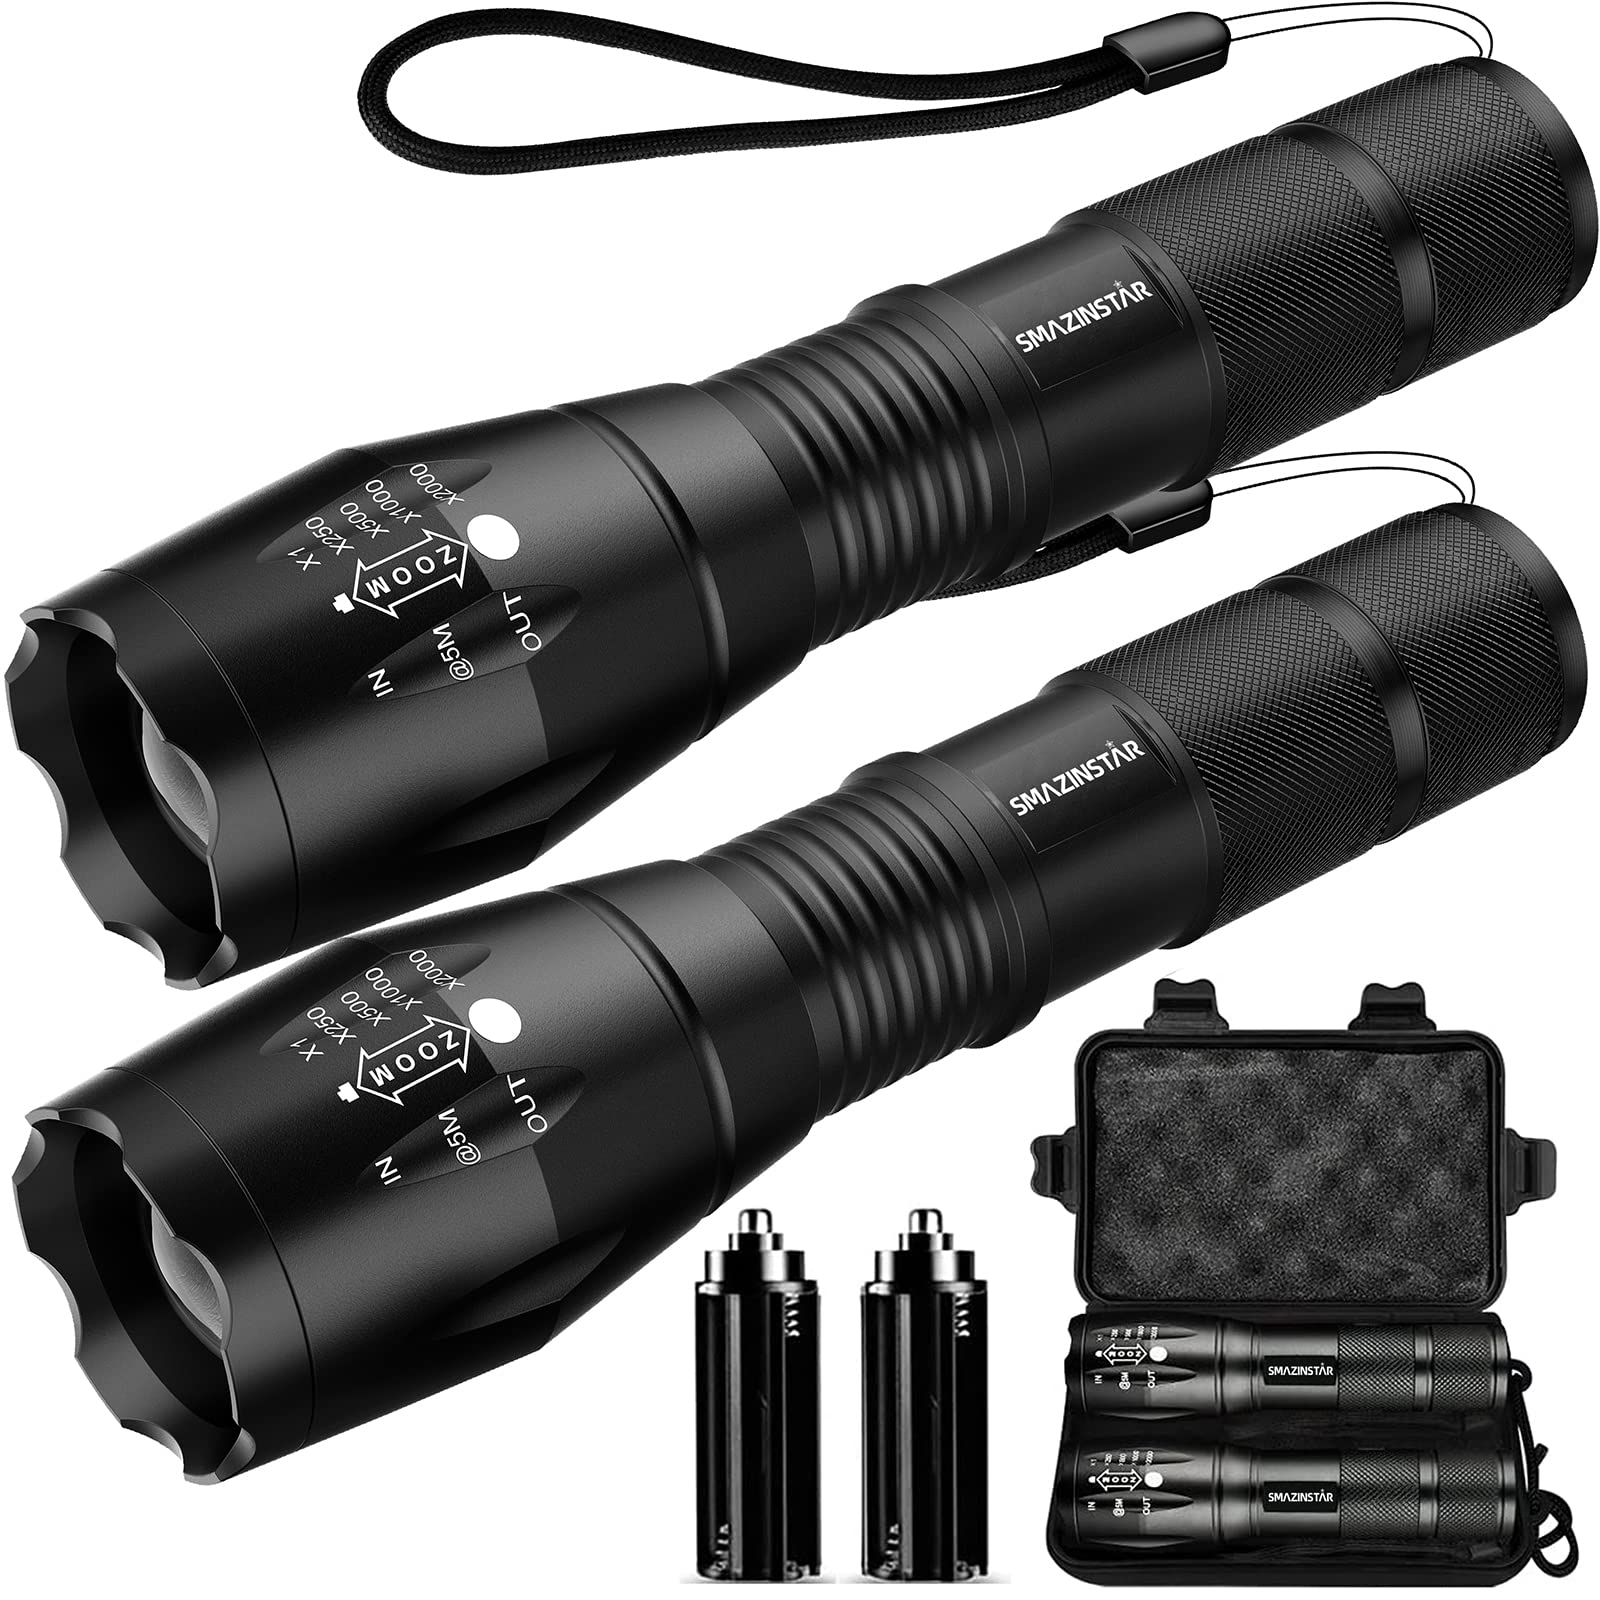 Torches LED Super Bright, Hand Torch LED Torch 1200 Lumen, Powerful Torch Battery Powered Water Resistant 5 Modes Tactical Torch for Camping Outdoors